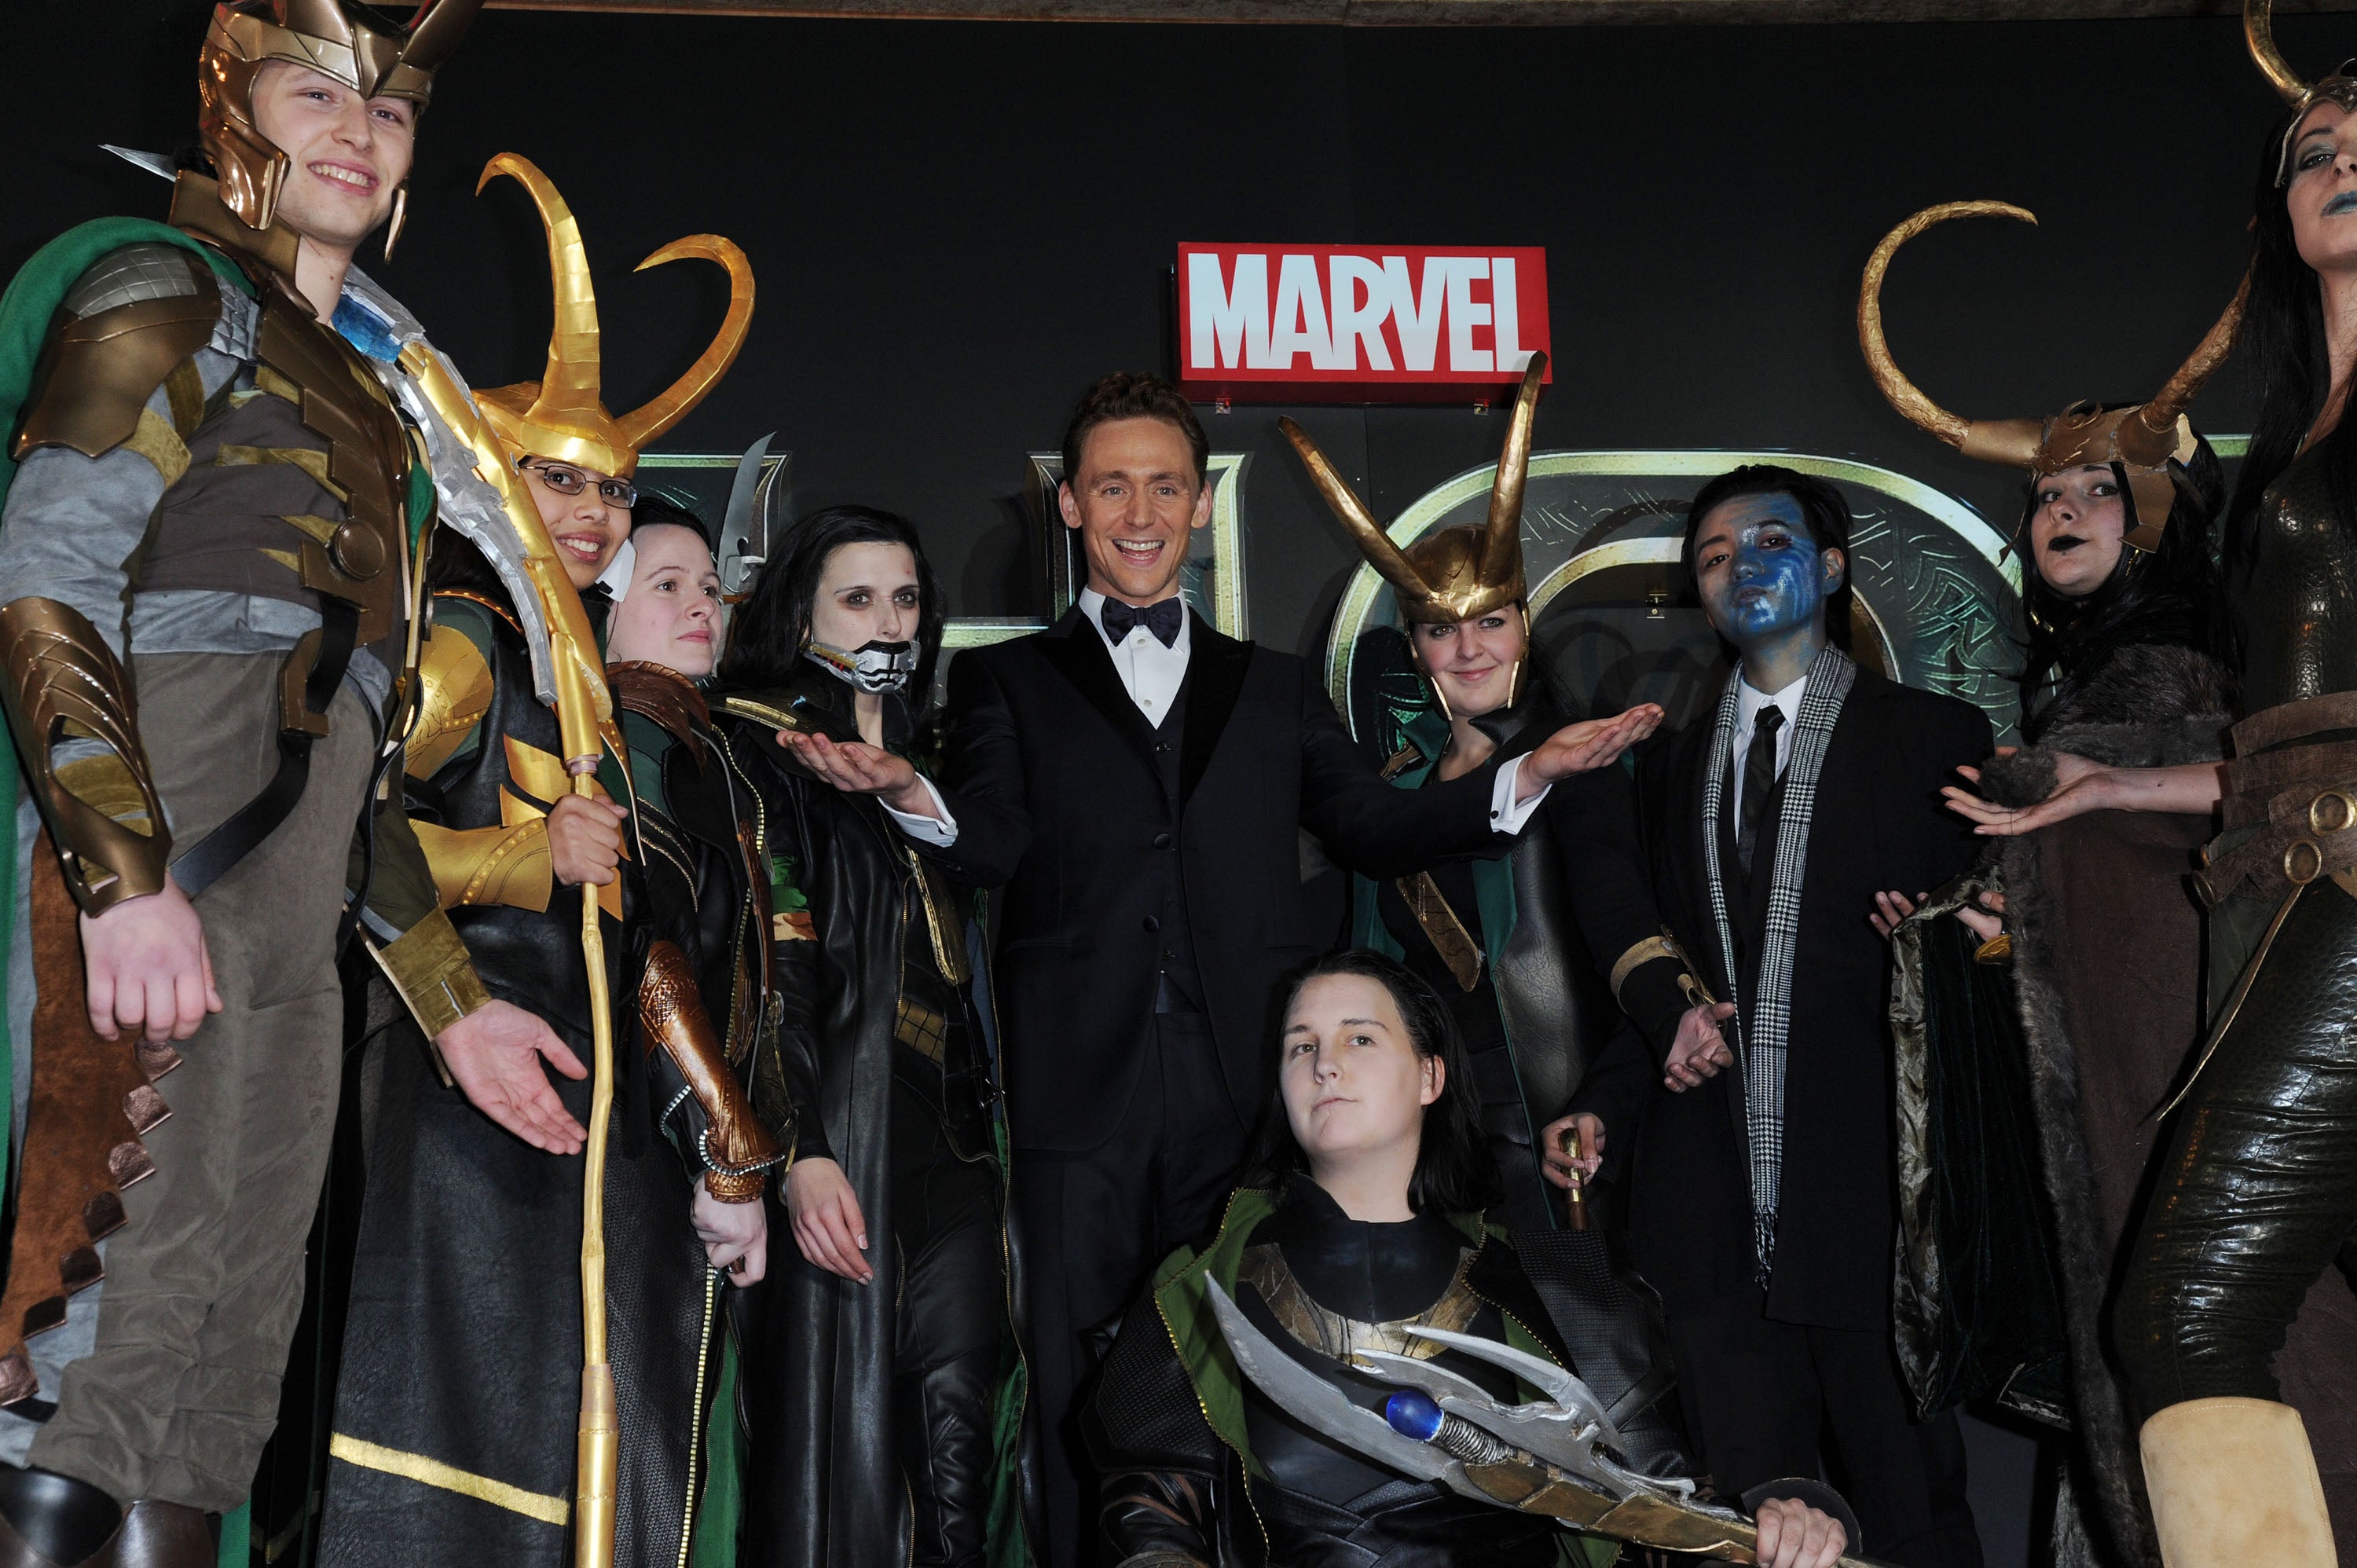 Tom Hiddleston at the premiere of ‘Thor: The Dark World’, surrounded by people dressed as Loki, on 22 October 2013 in London